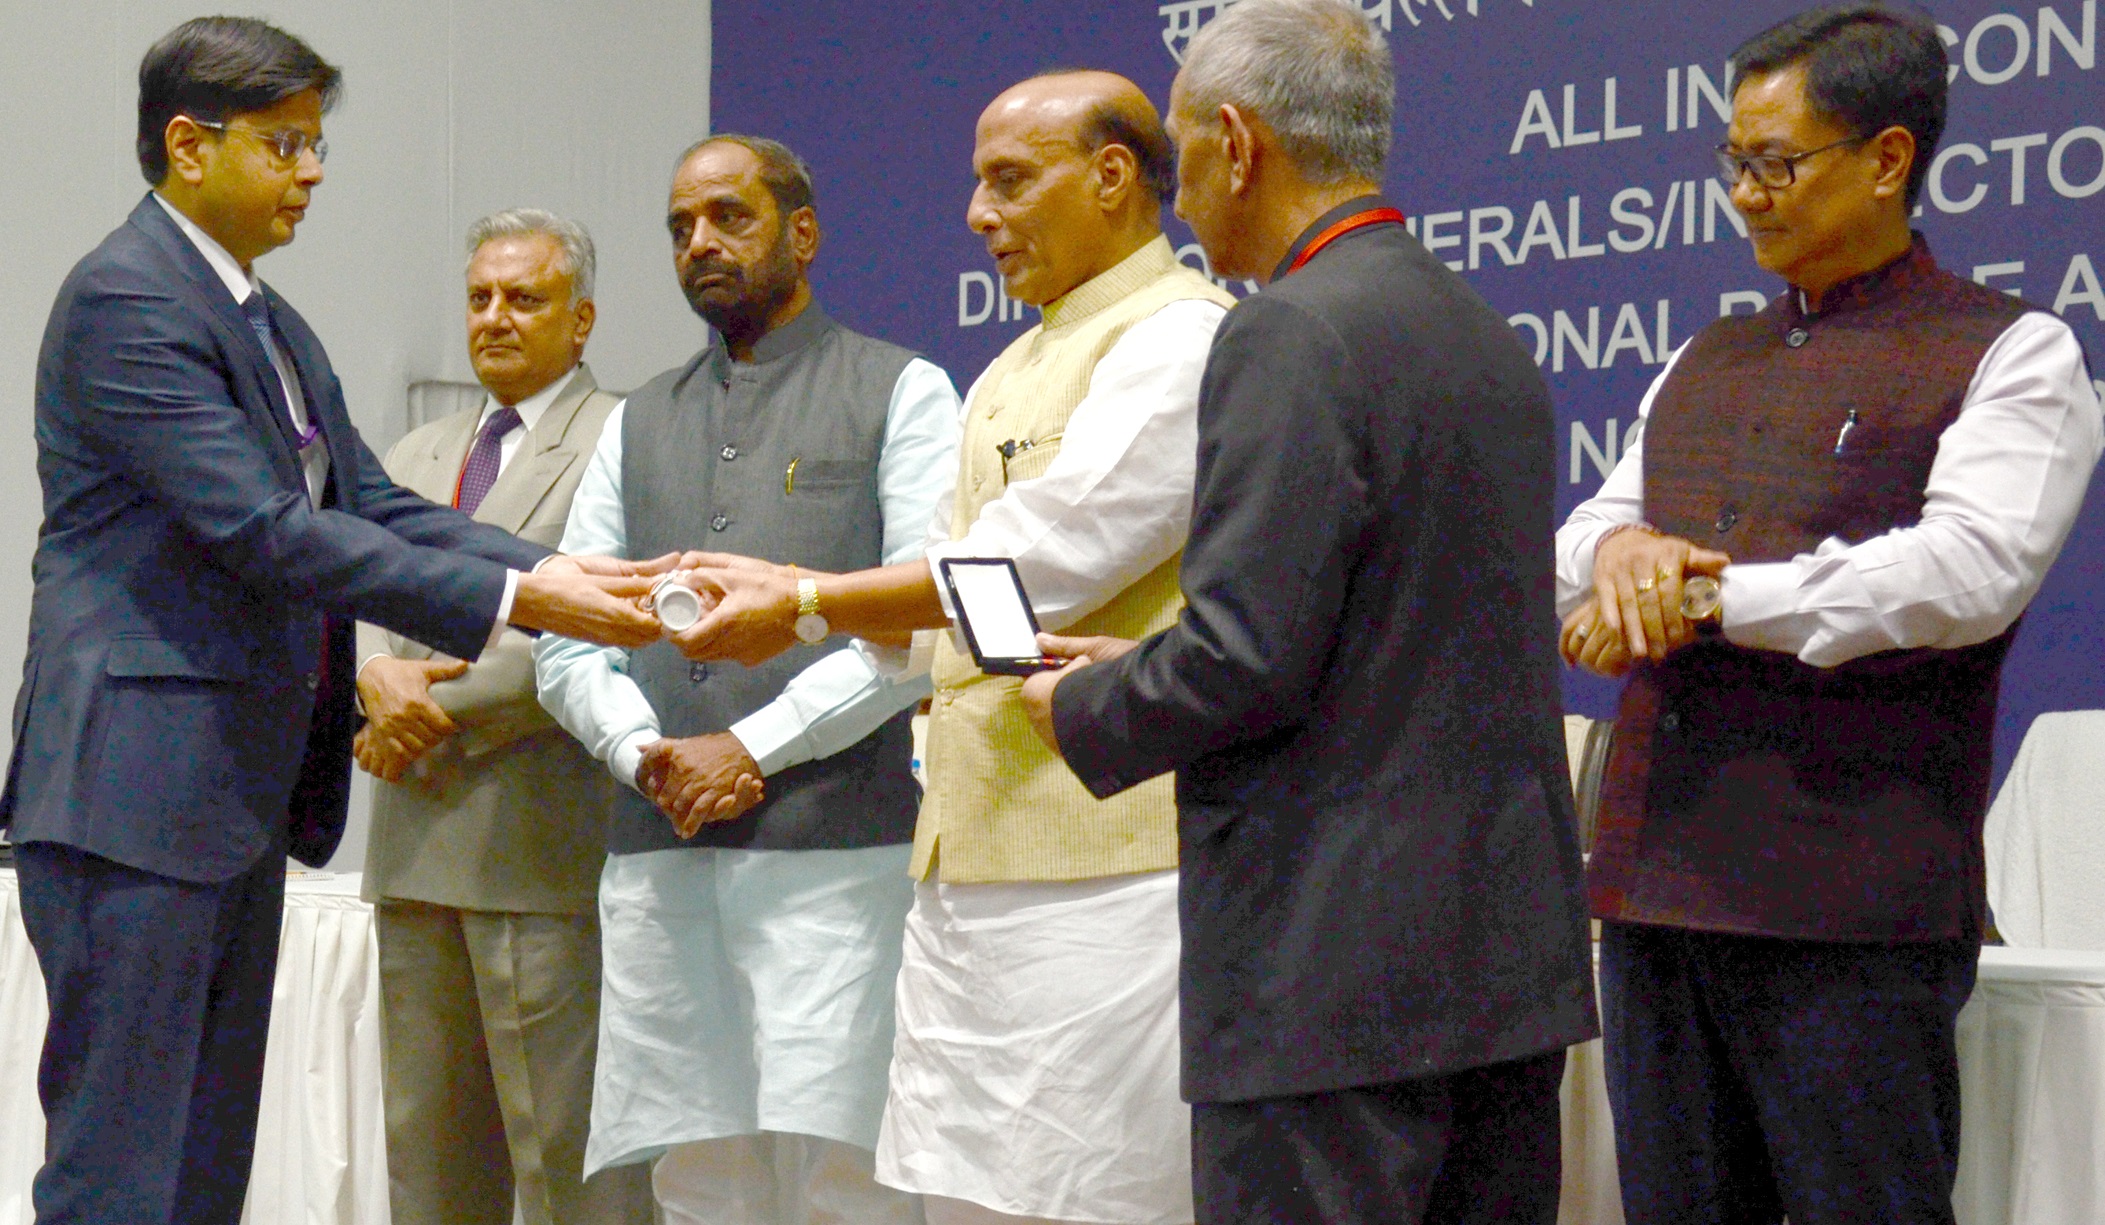 The Union Home Minister, Shri Rajnath Singh presenting the Police Medals for meritorious service to the officers of Intelligence Bureau (IB), at the inauguration of the All India Conference of DGPs/IGPs, 2016, at Sardar Vallabhbhai Patel National Police Academy, in Hyderabad on November 25, 2016. 	The Ministers of State for Home Affairs, Shri Hansraj Gangaram Ahir & Shri Kiren Rijiju and other dignitaries are also seen.